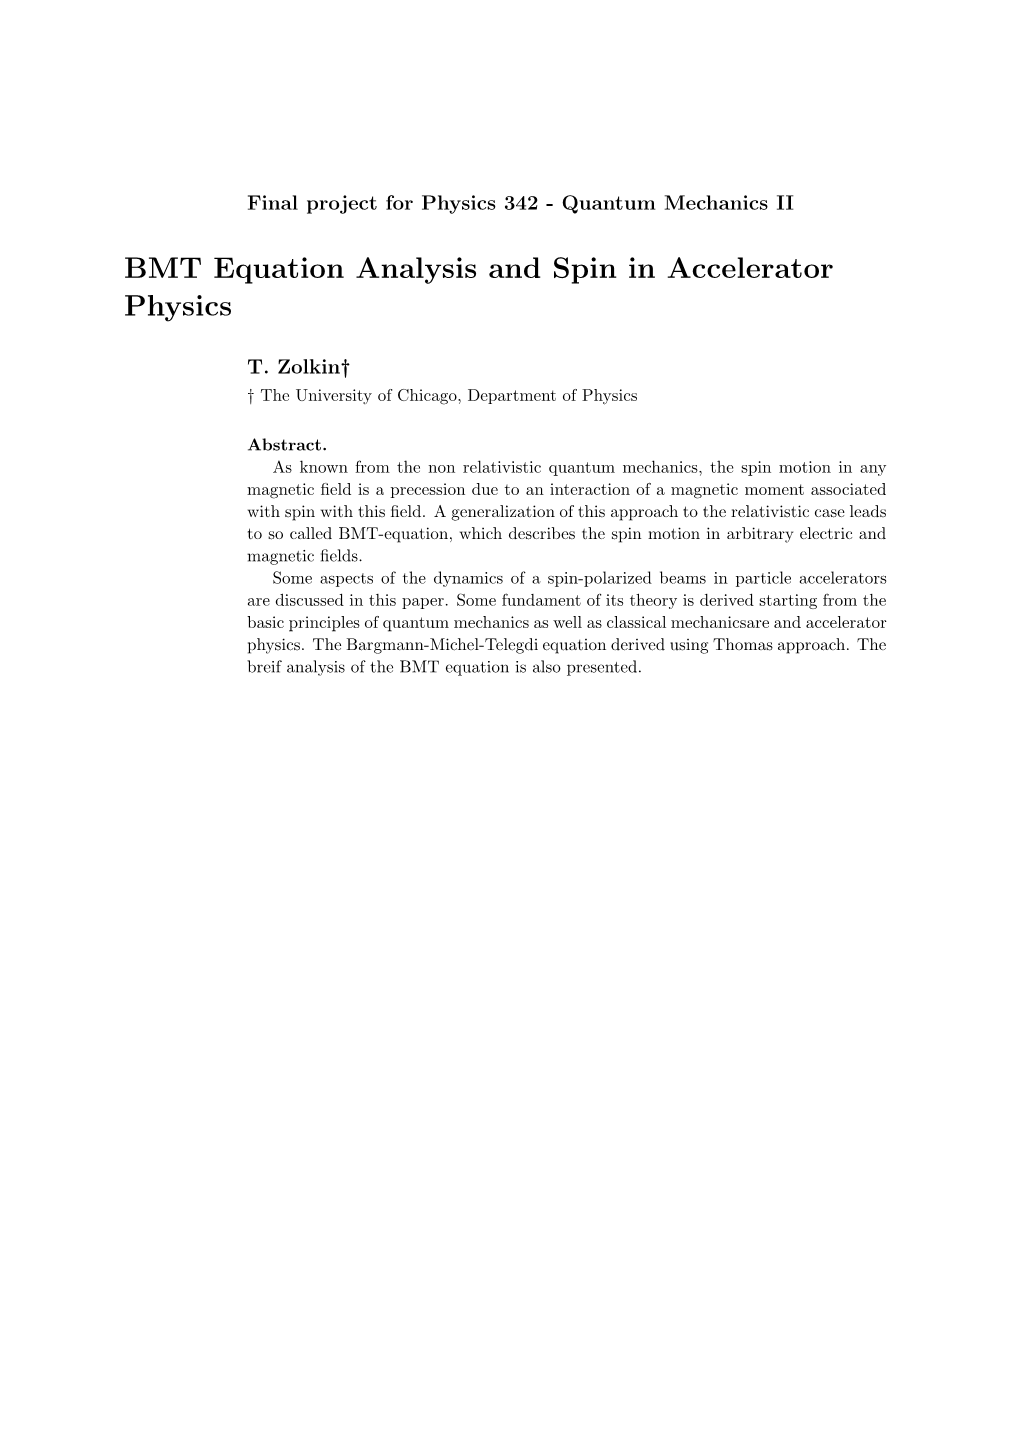 BMT Equation Analysis and Spin in Accelerator Physics